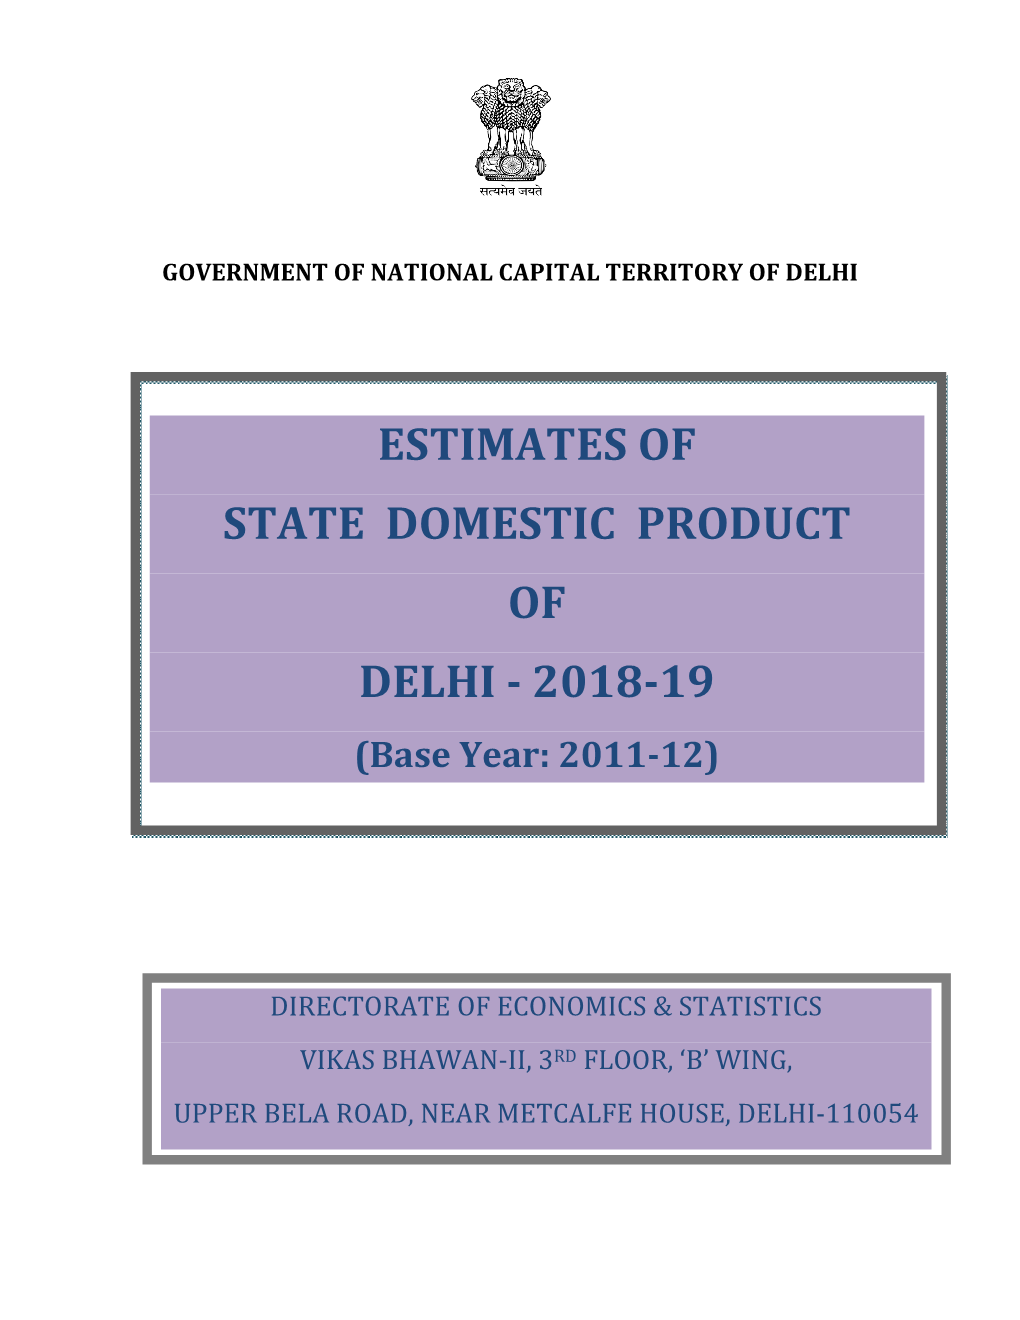 ESTIMATES of STATE DOMESTIC PRODUCT of DELHI - 2018-19 (Base Year: 2011-12)